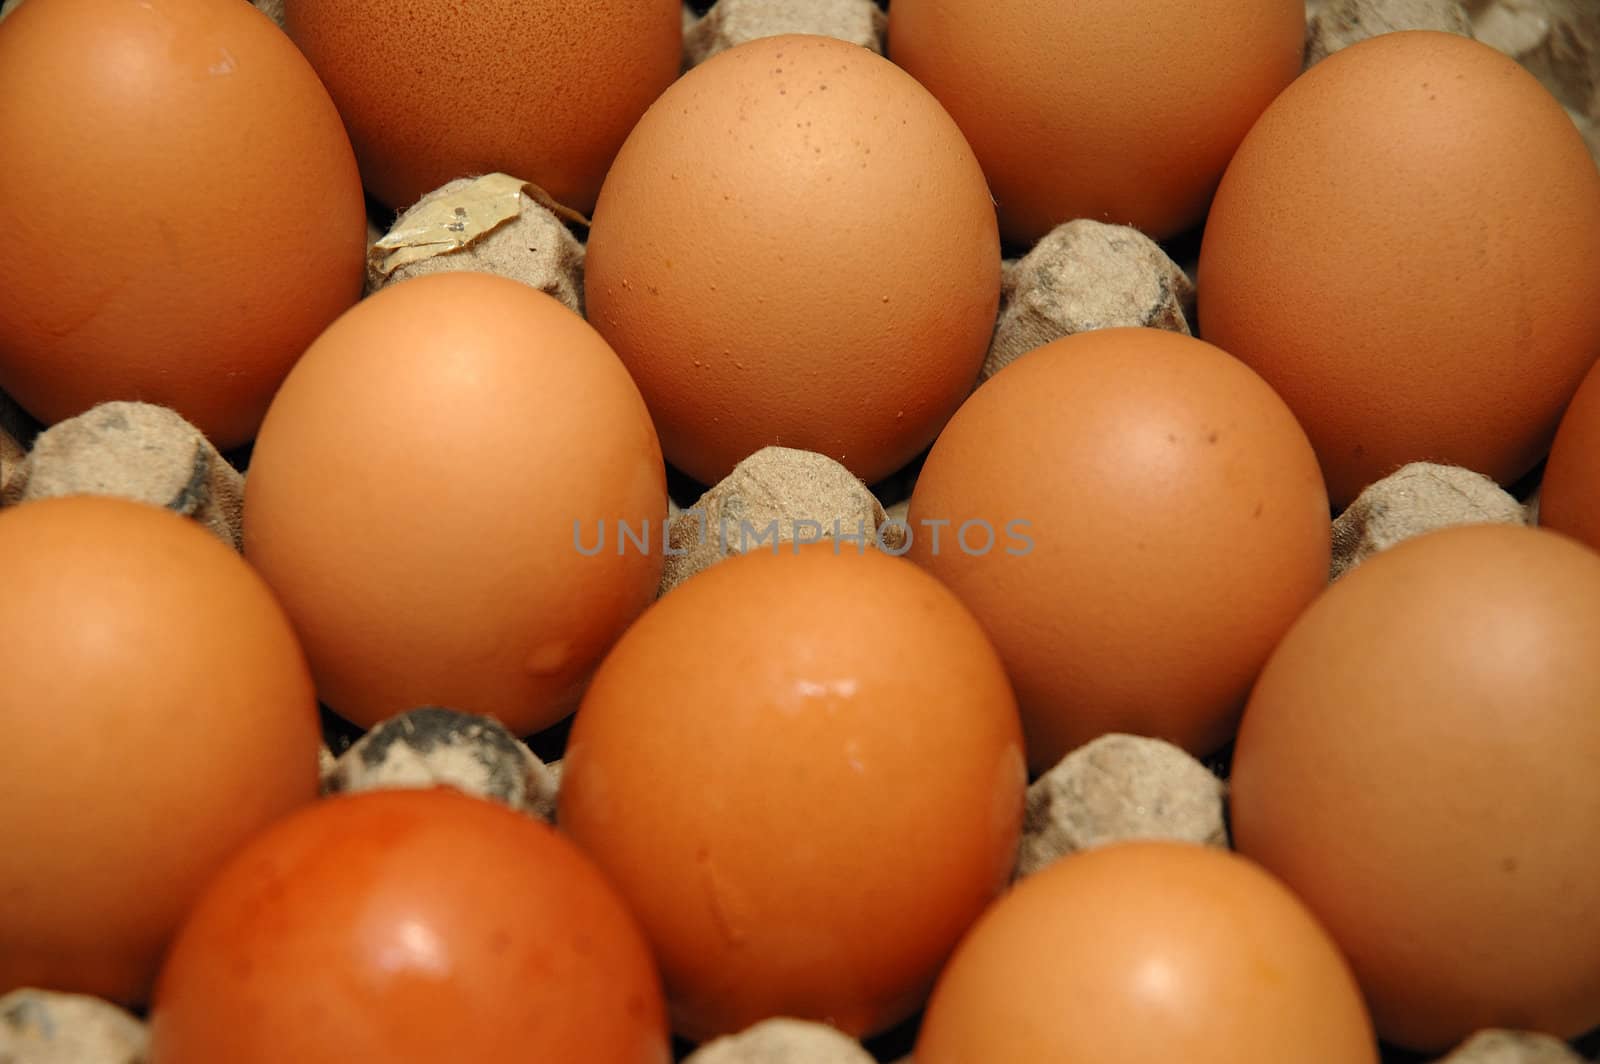 egg that contain a good nutrition for body